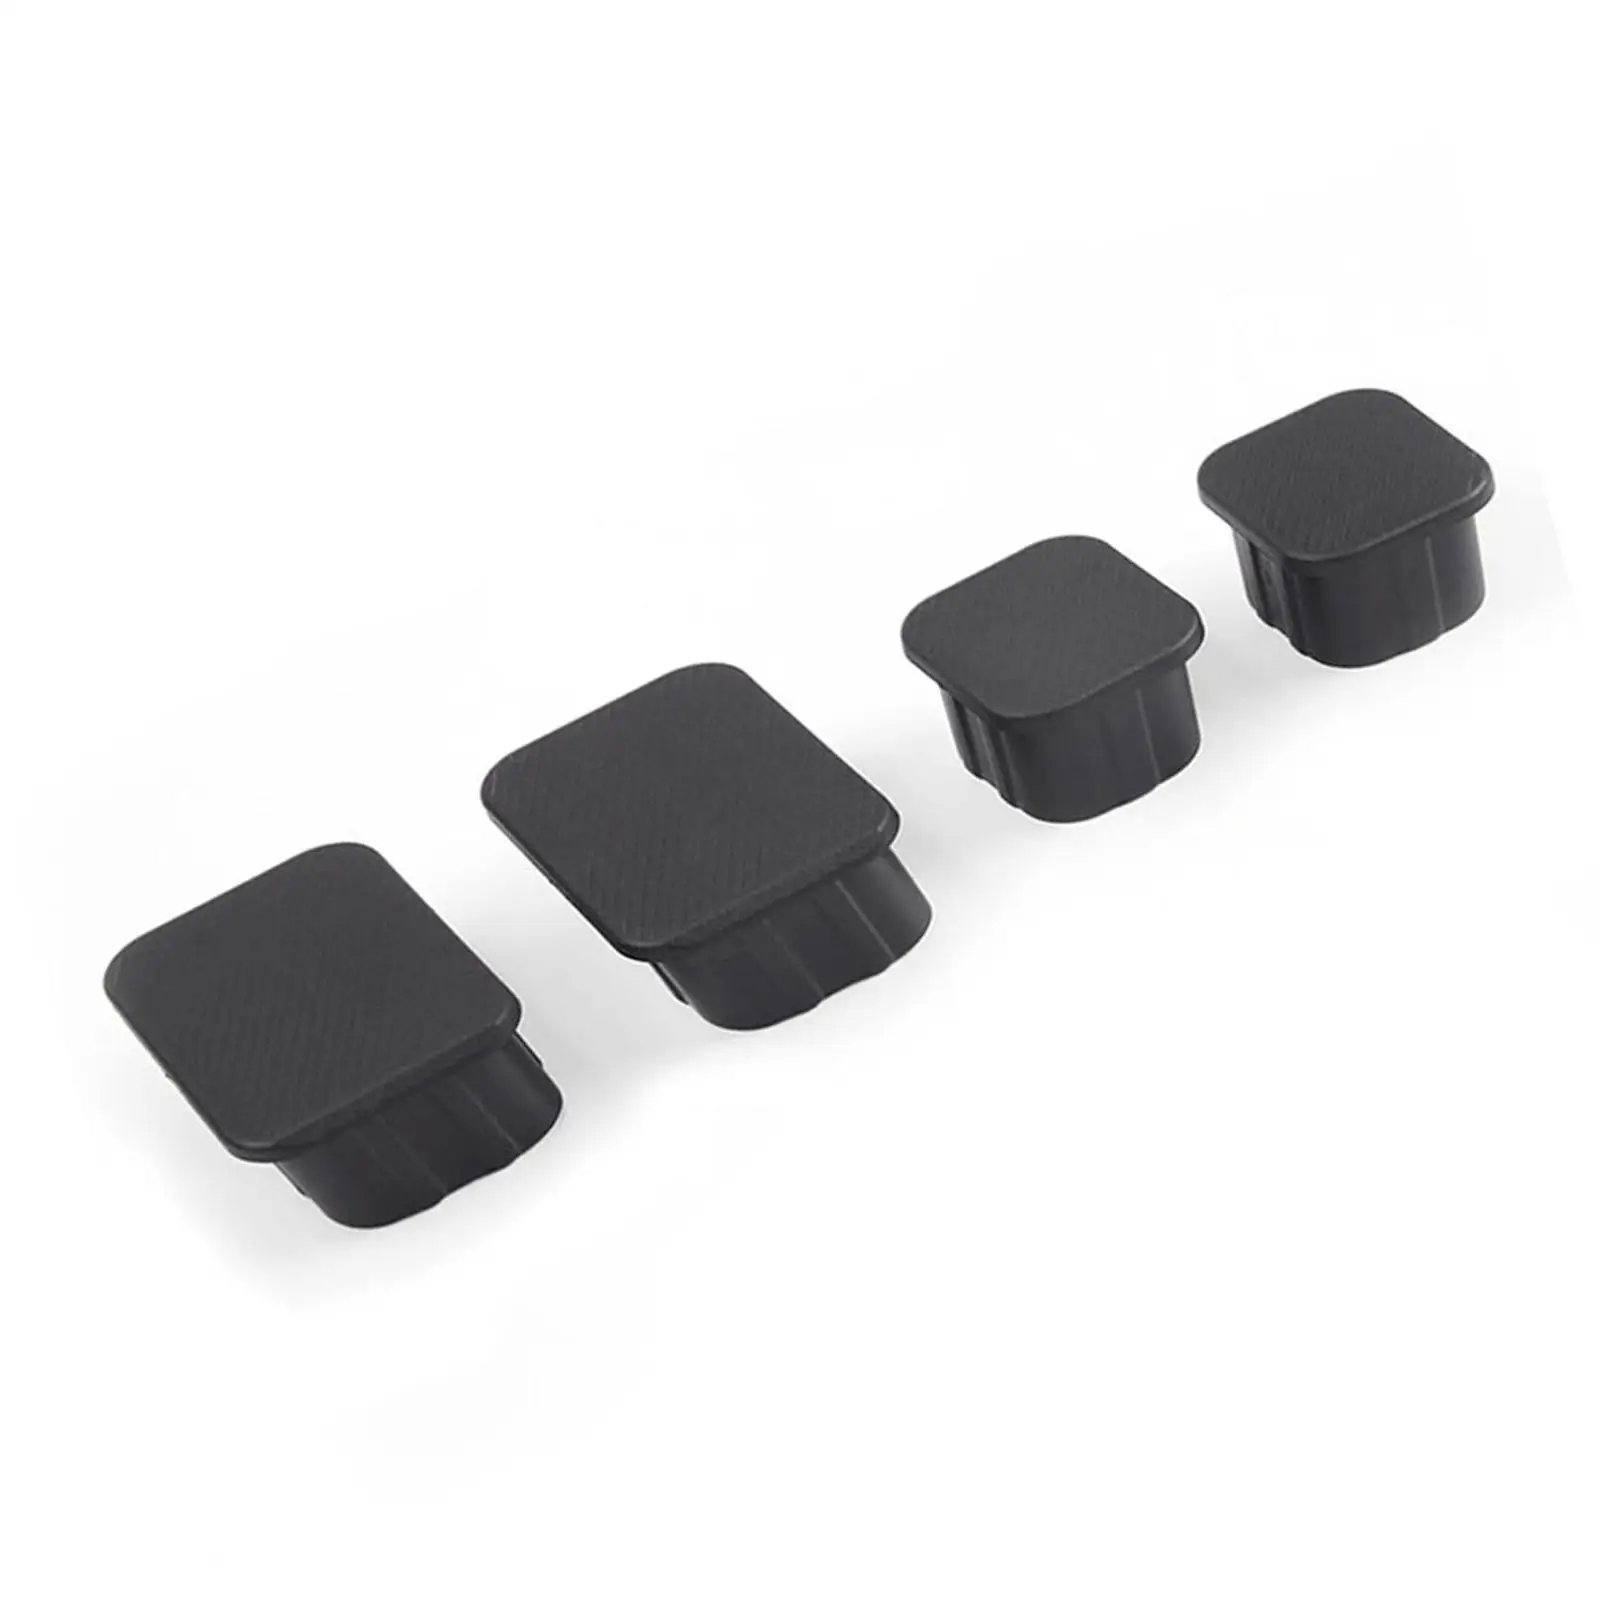 4x Front Axle Plug Easy to Install Rubber Cover Protection Black for Ford Bronco